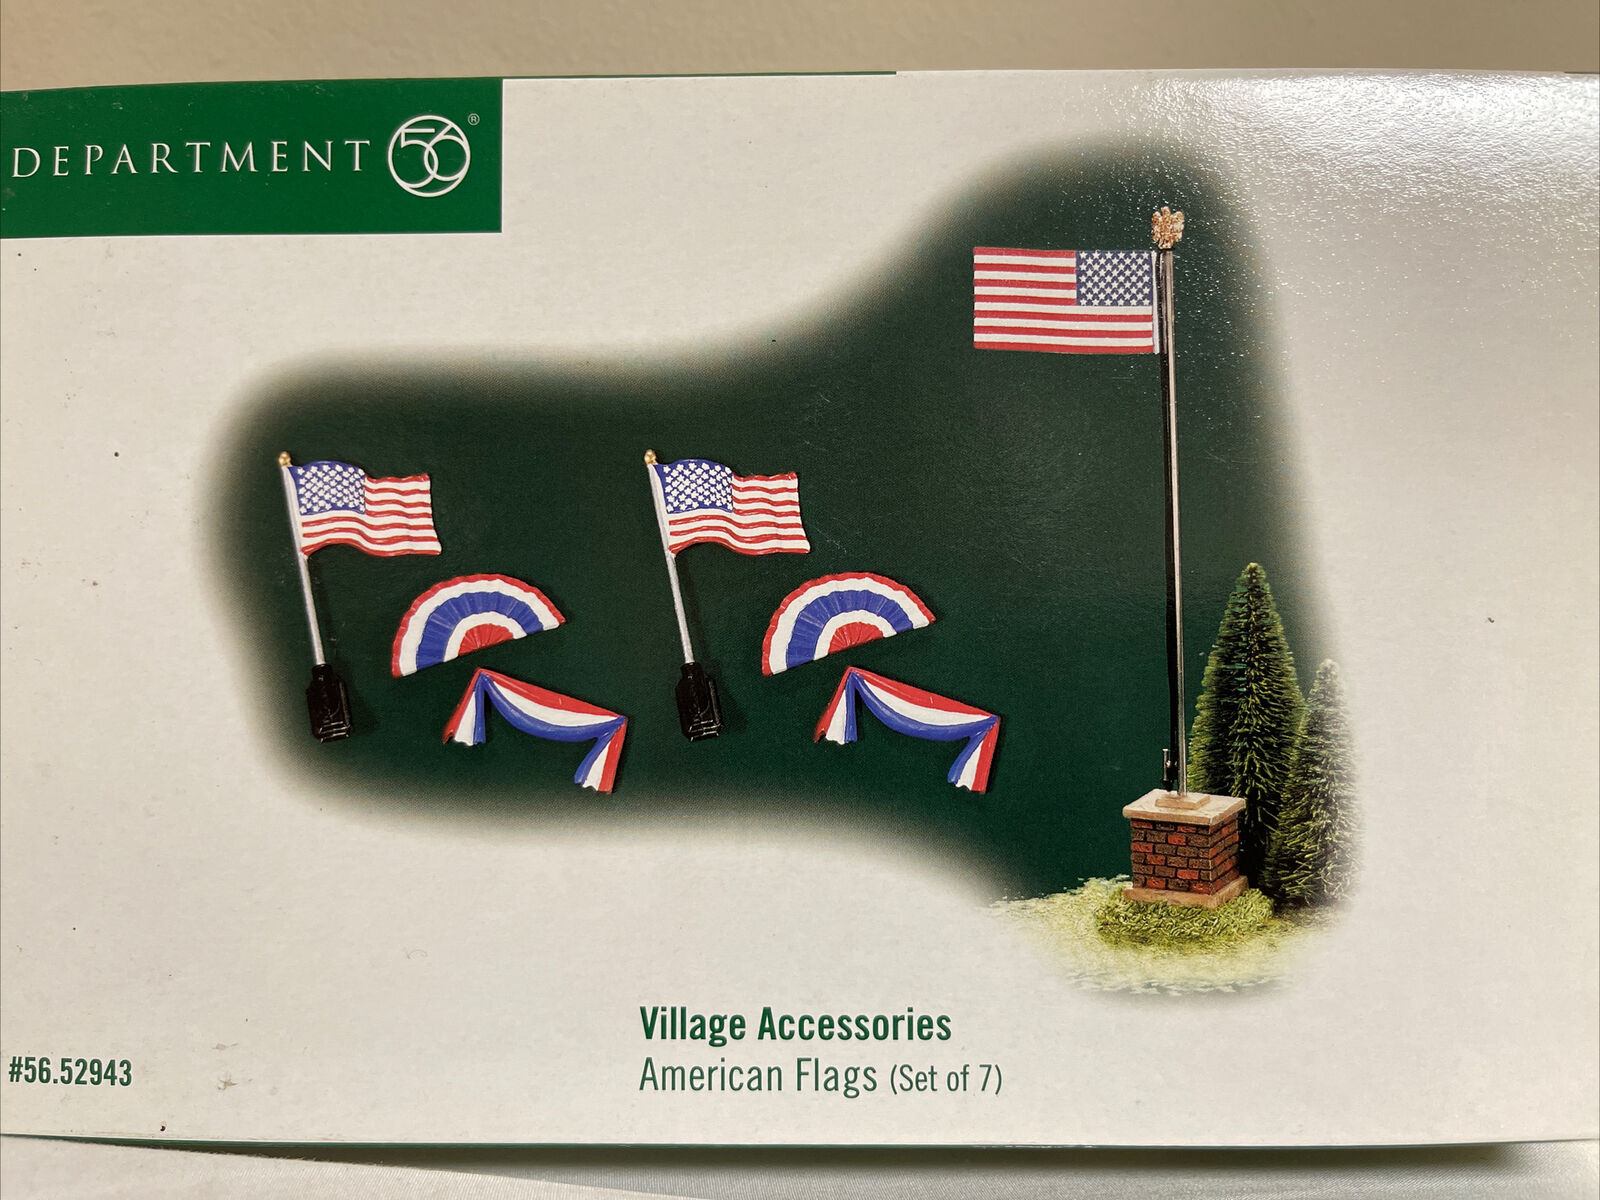 Dept 56 Village Accessories AMERICAN FLAGS, Set of 7,  52943  NEW